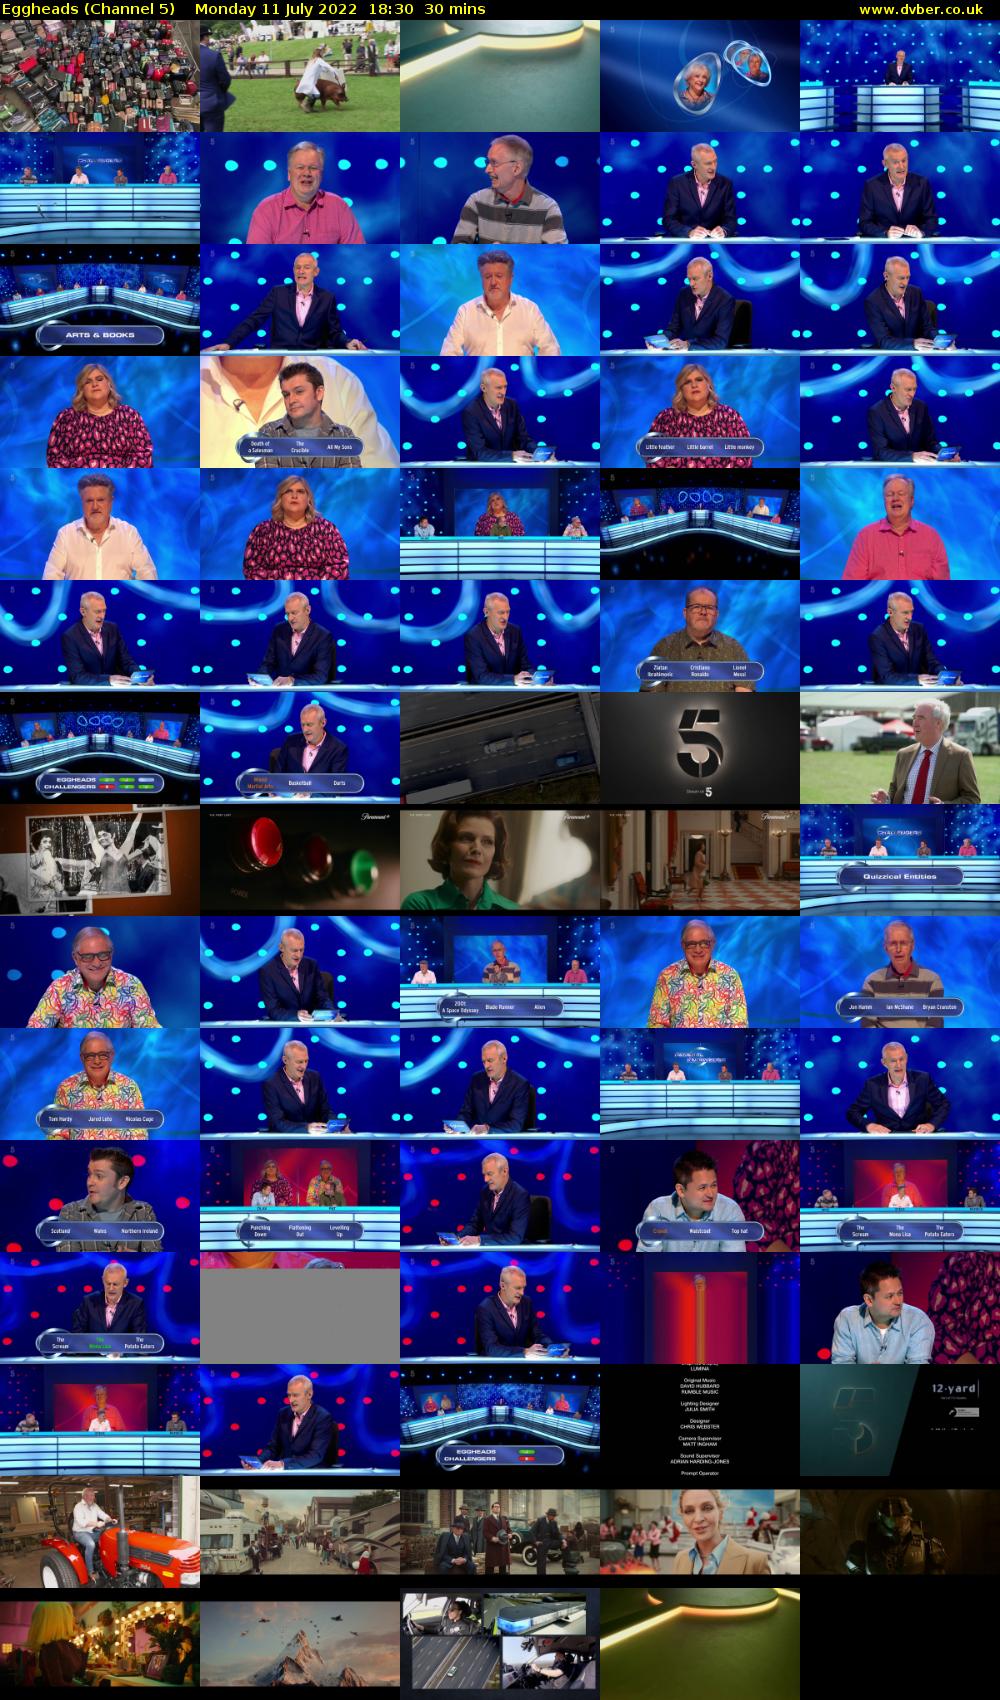 Eggheads (Channel 5) Monday 11 July 2022 18:30 - 19:00